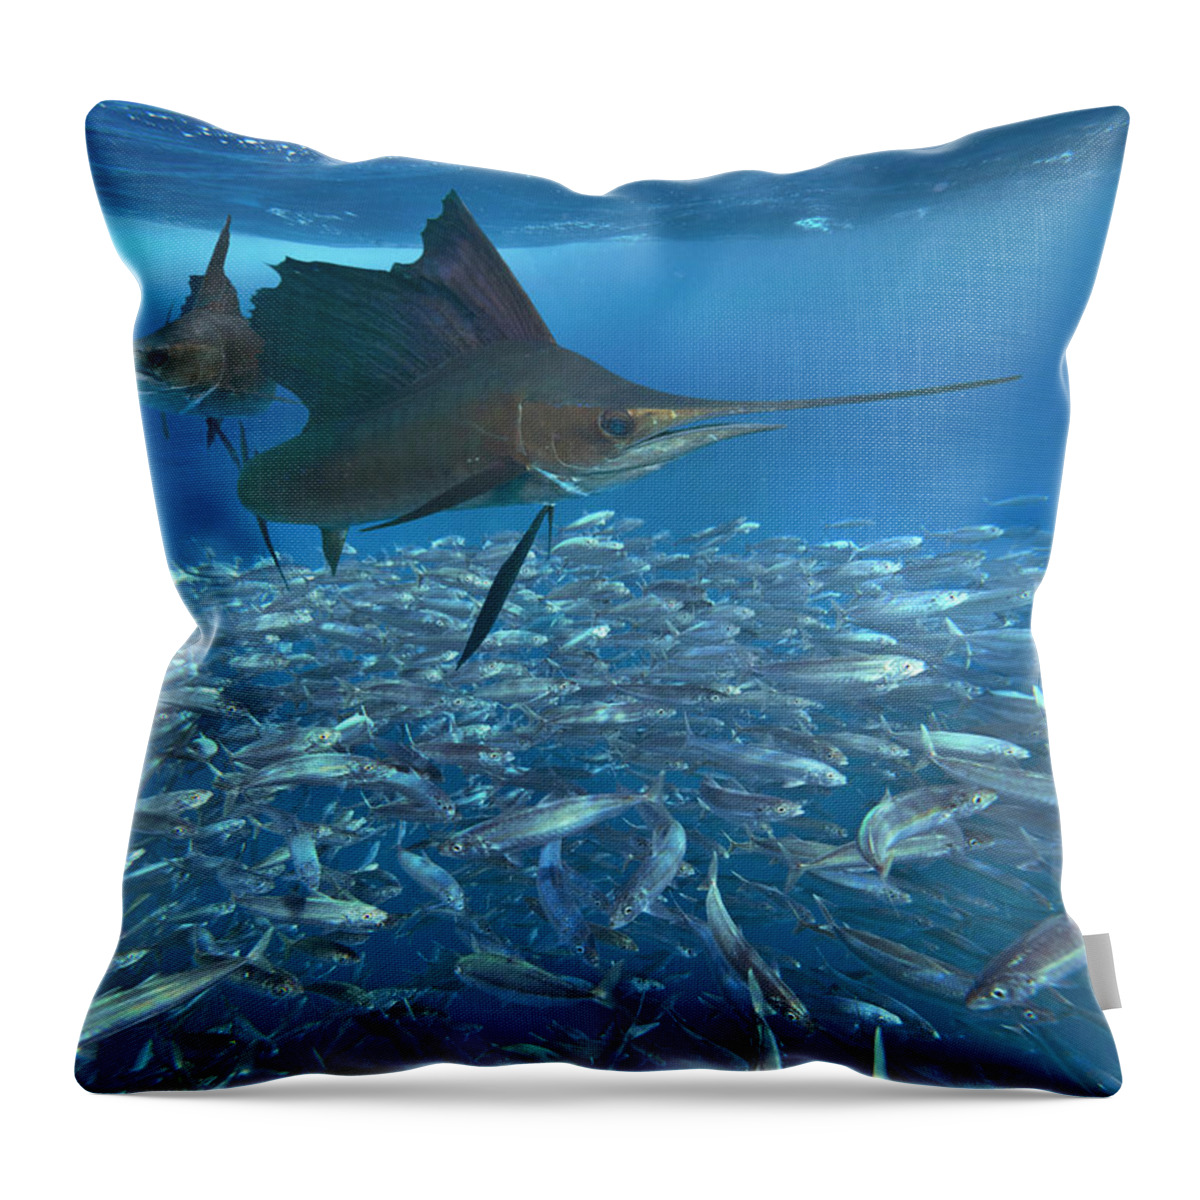 00558730 Throw Pillow featuring the photograph Sailfish Hunting Round Sardinella, Isla Mujeres, Mexico by Tim Fitzharris